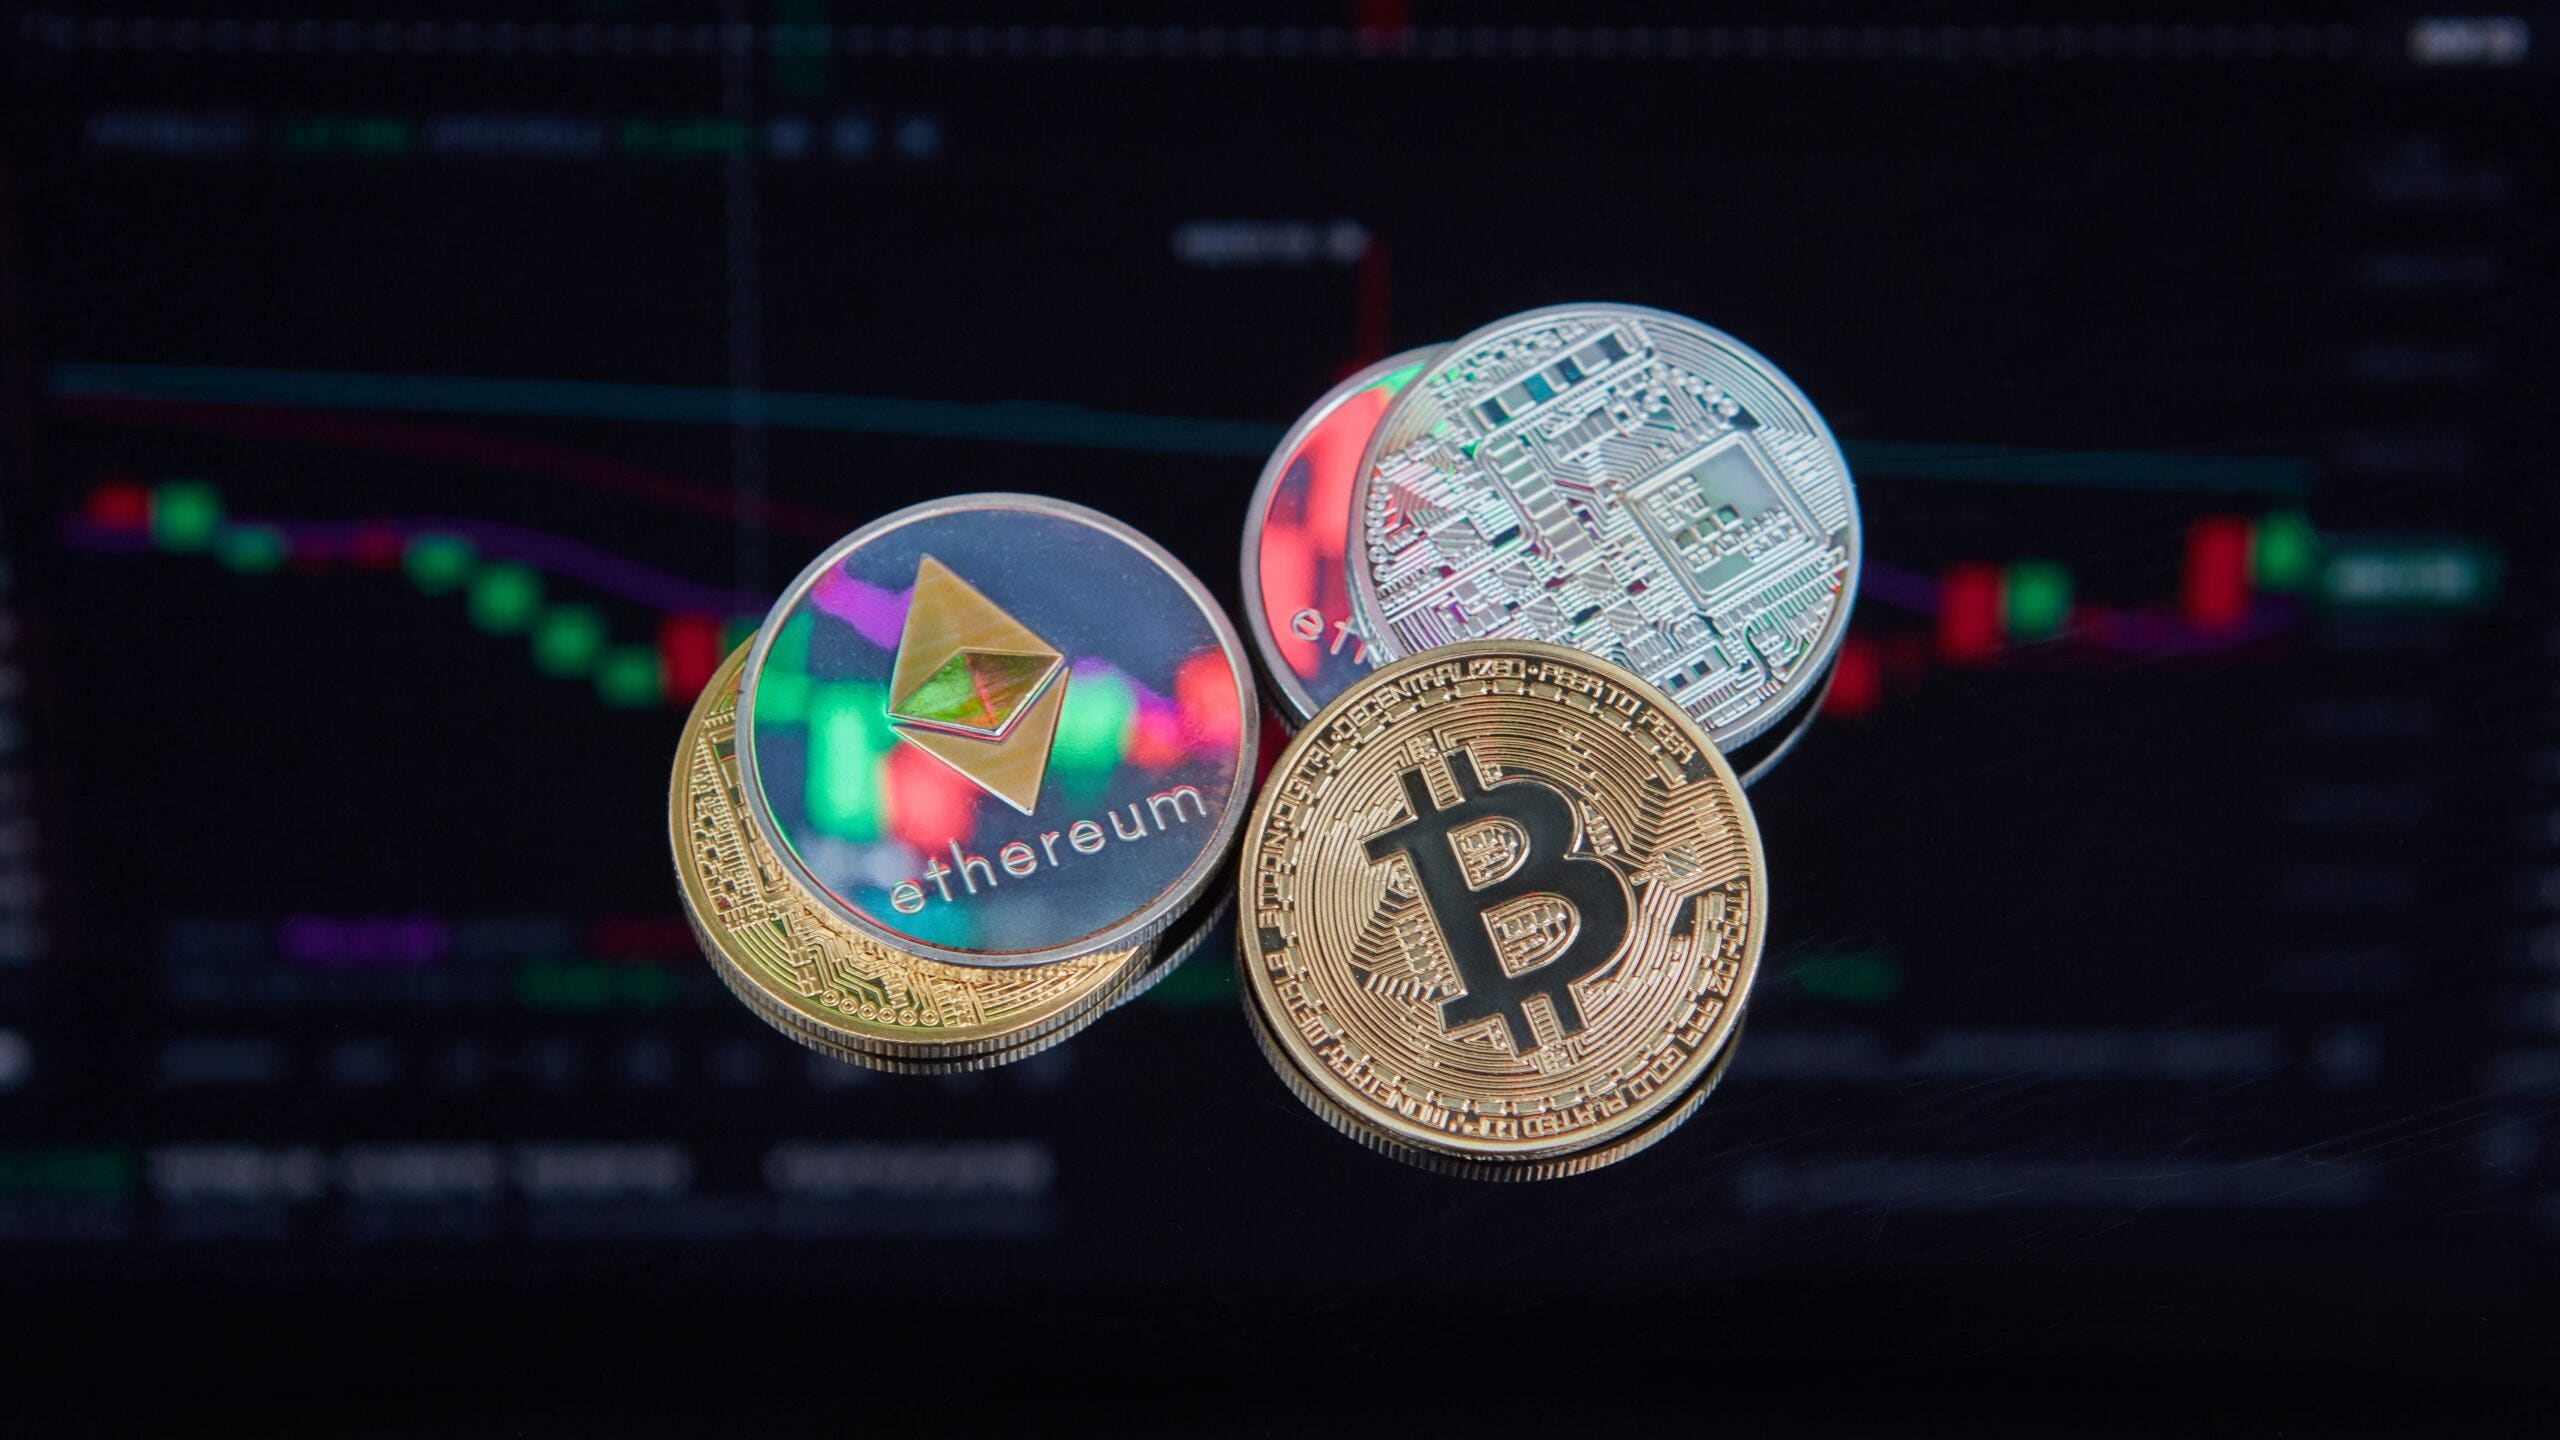 Bitcoin vs. Ethereum: What’s the Biggest Difference? - NerdWallet